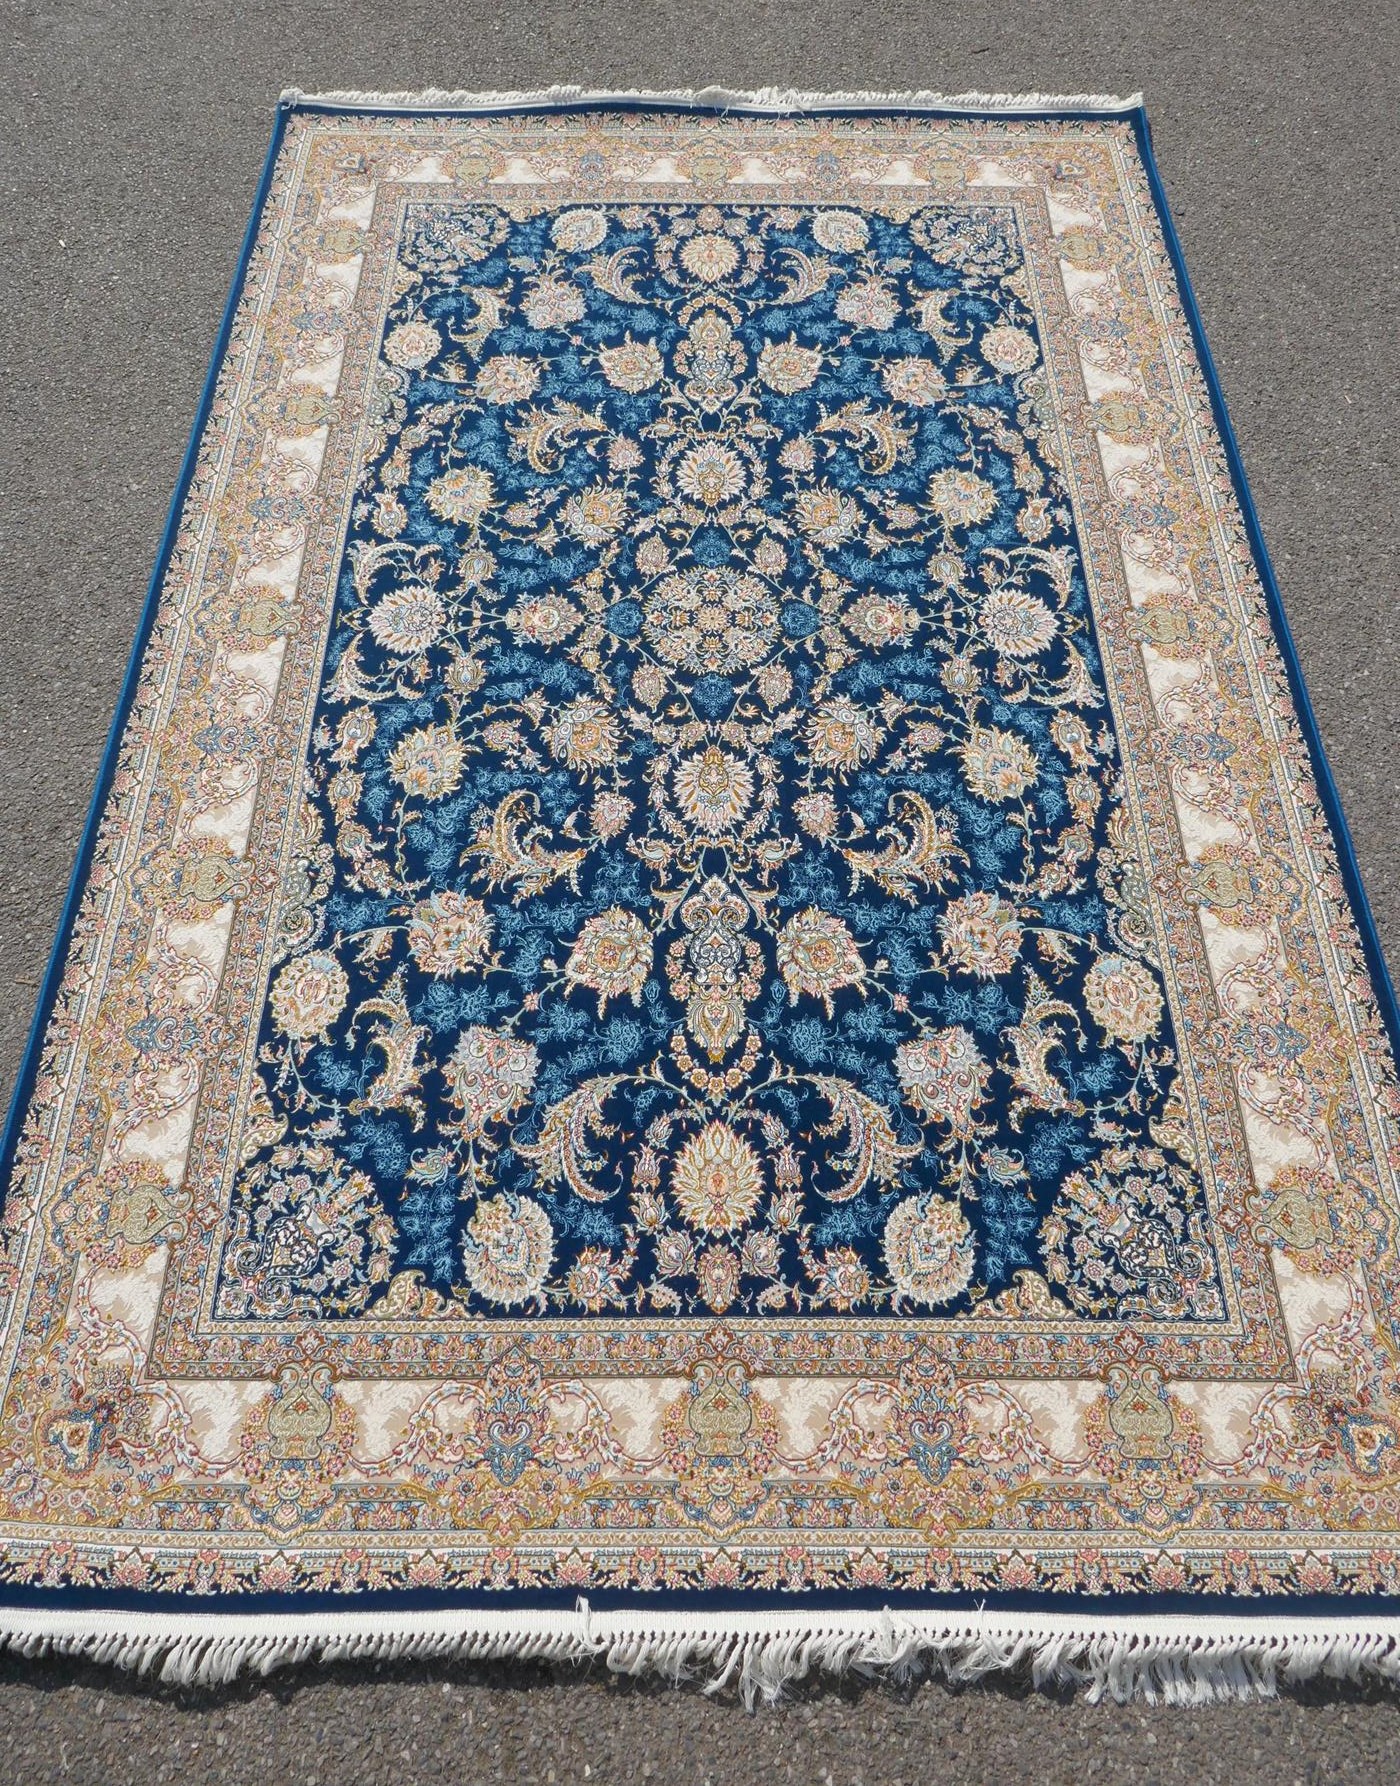 A fine woven blue and cream ground Persian carpet full pile with traditional allover floral